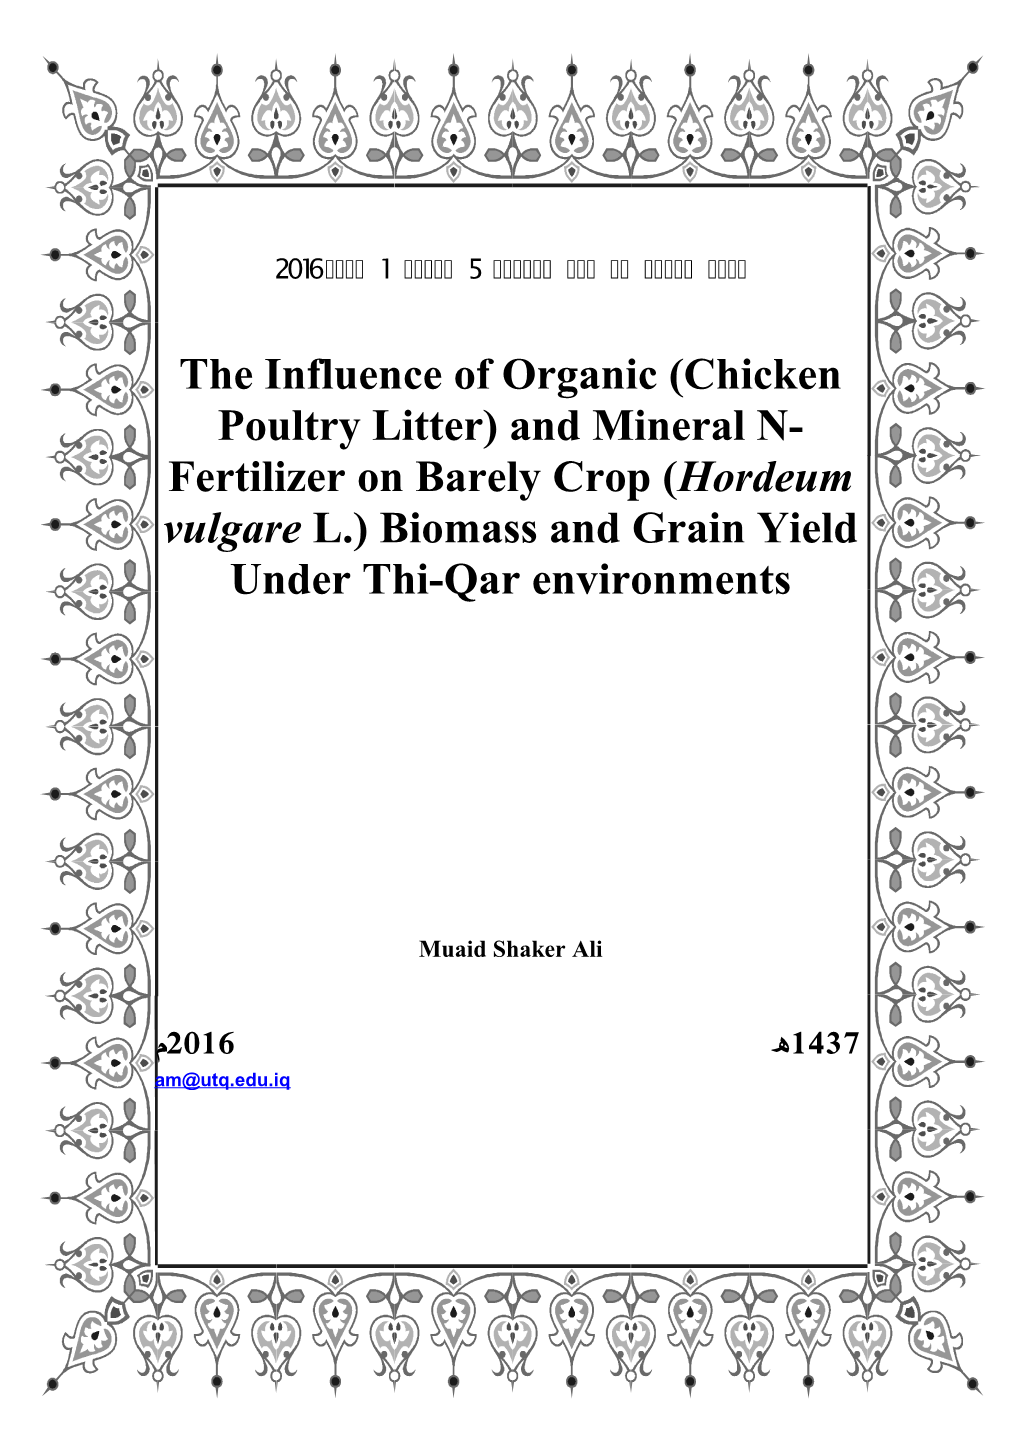 The Influence of Organic (Chicken Poultry Litter) and Mineral N-Fertilizer on Barely Crop